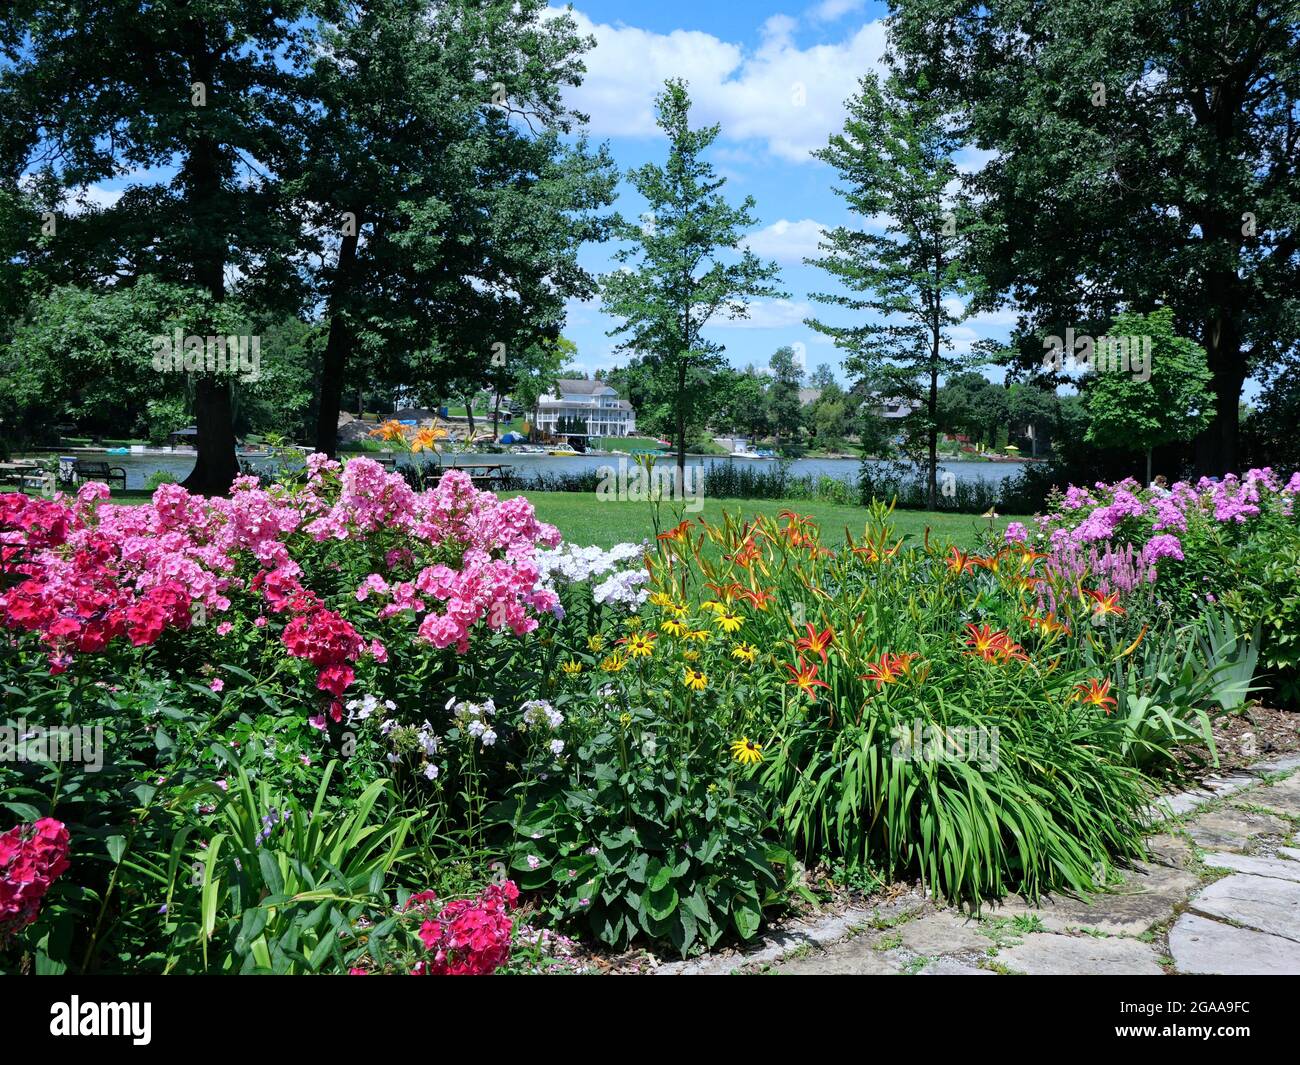 Summer flower garden with phlox in pink, red, and mauve, Stephen Leacock home museum Stock Photo